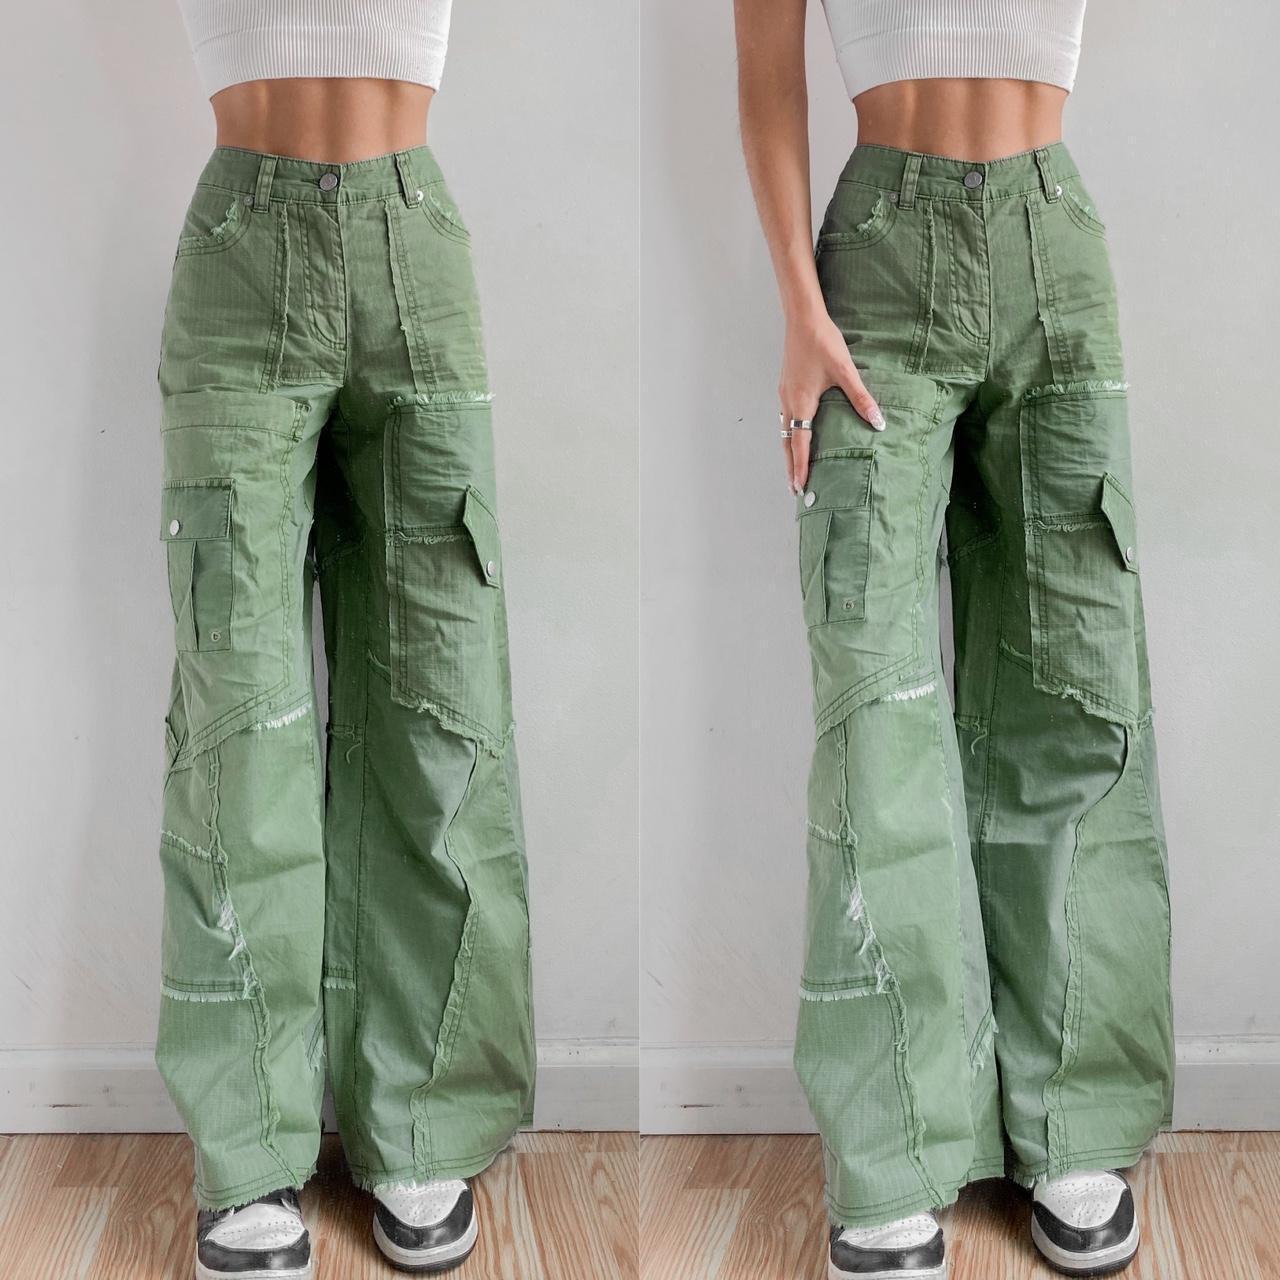 urban outfitters low rise cargo pants, nwot size - Depop